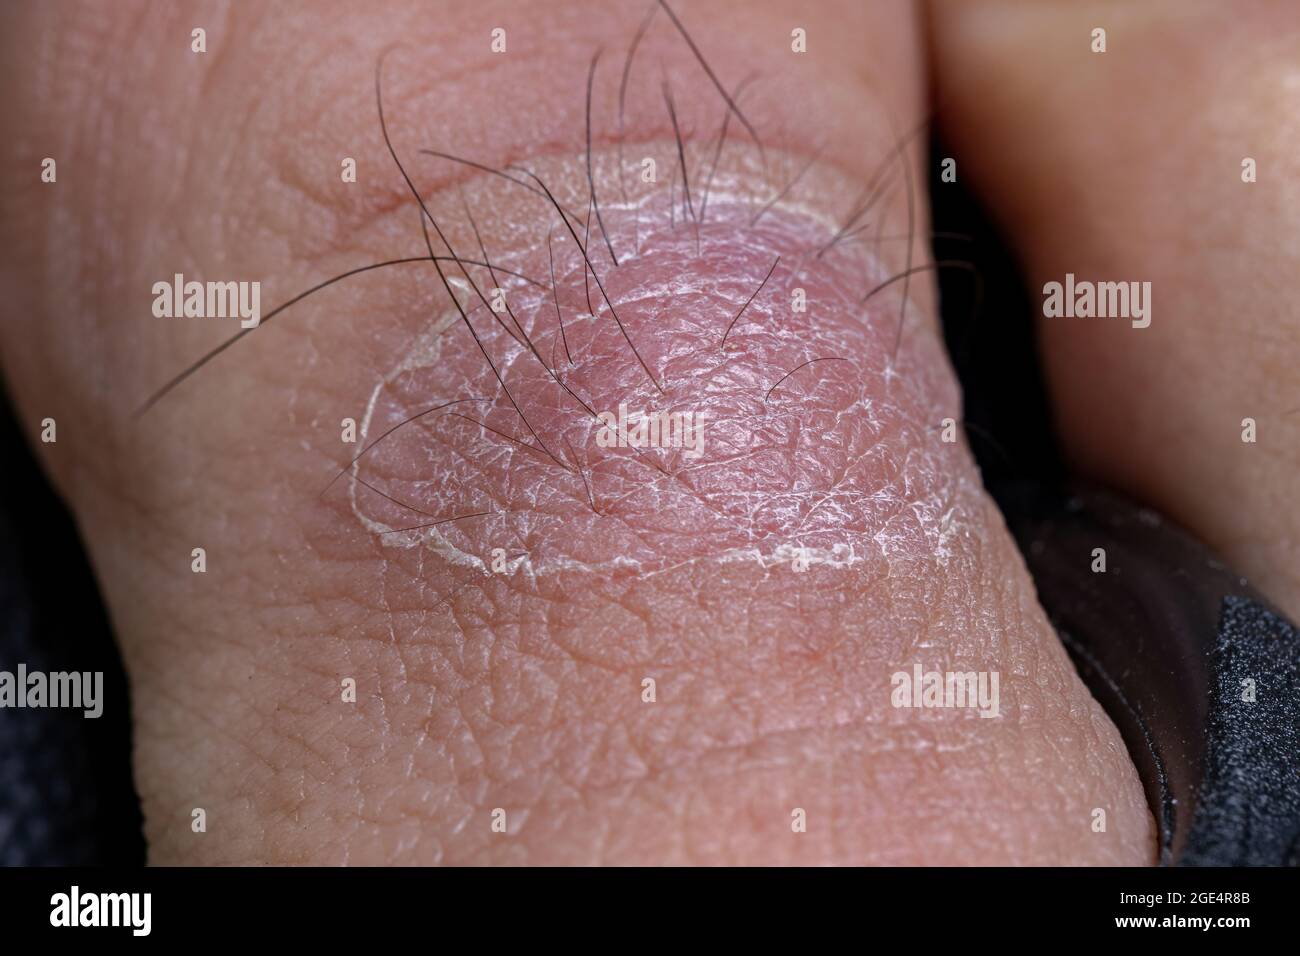 Infected Ingrown Hair Pictures Treatment Removal and More